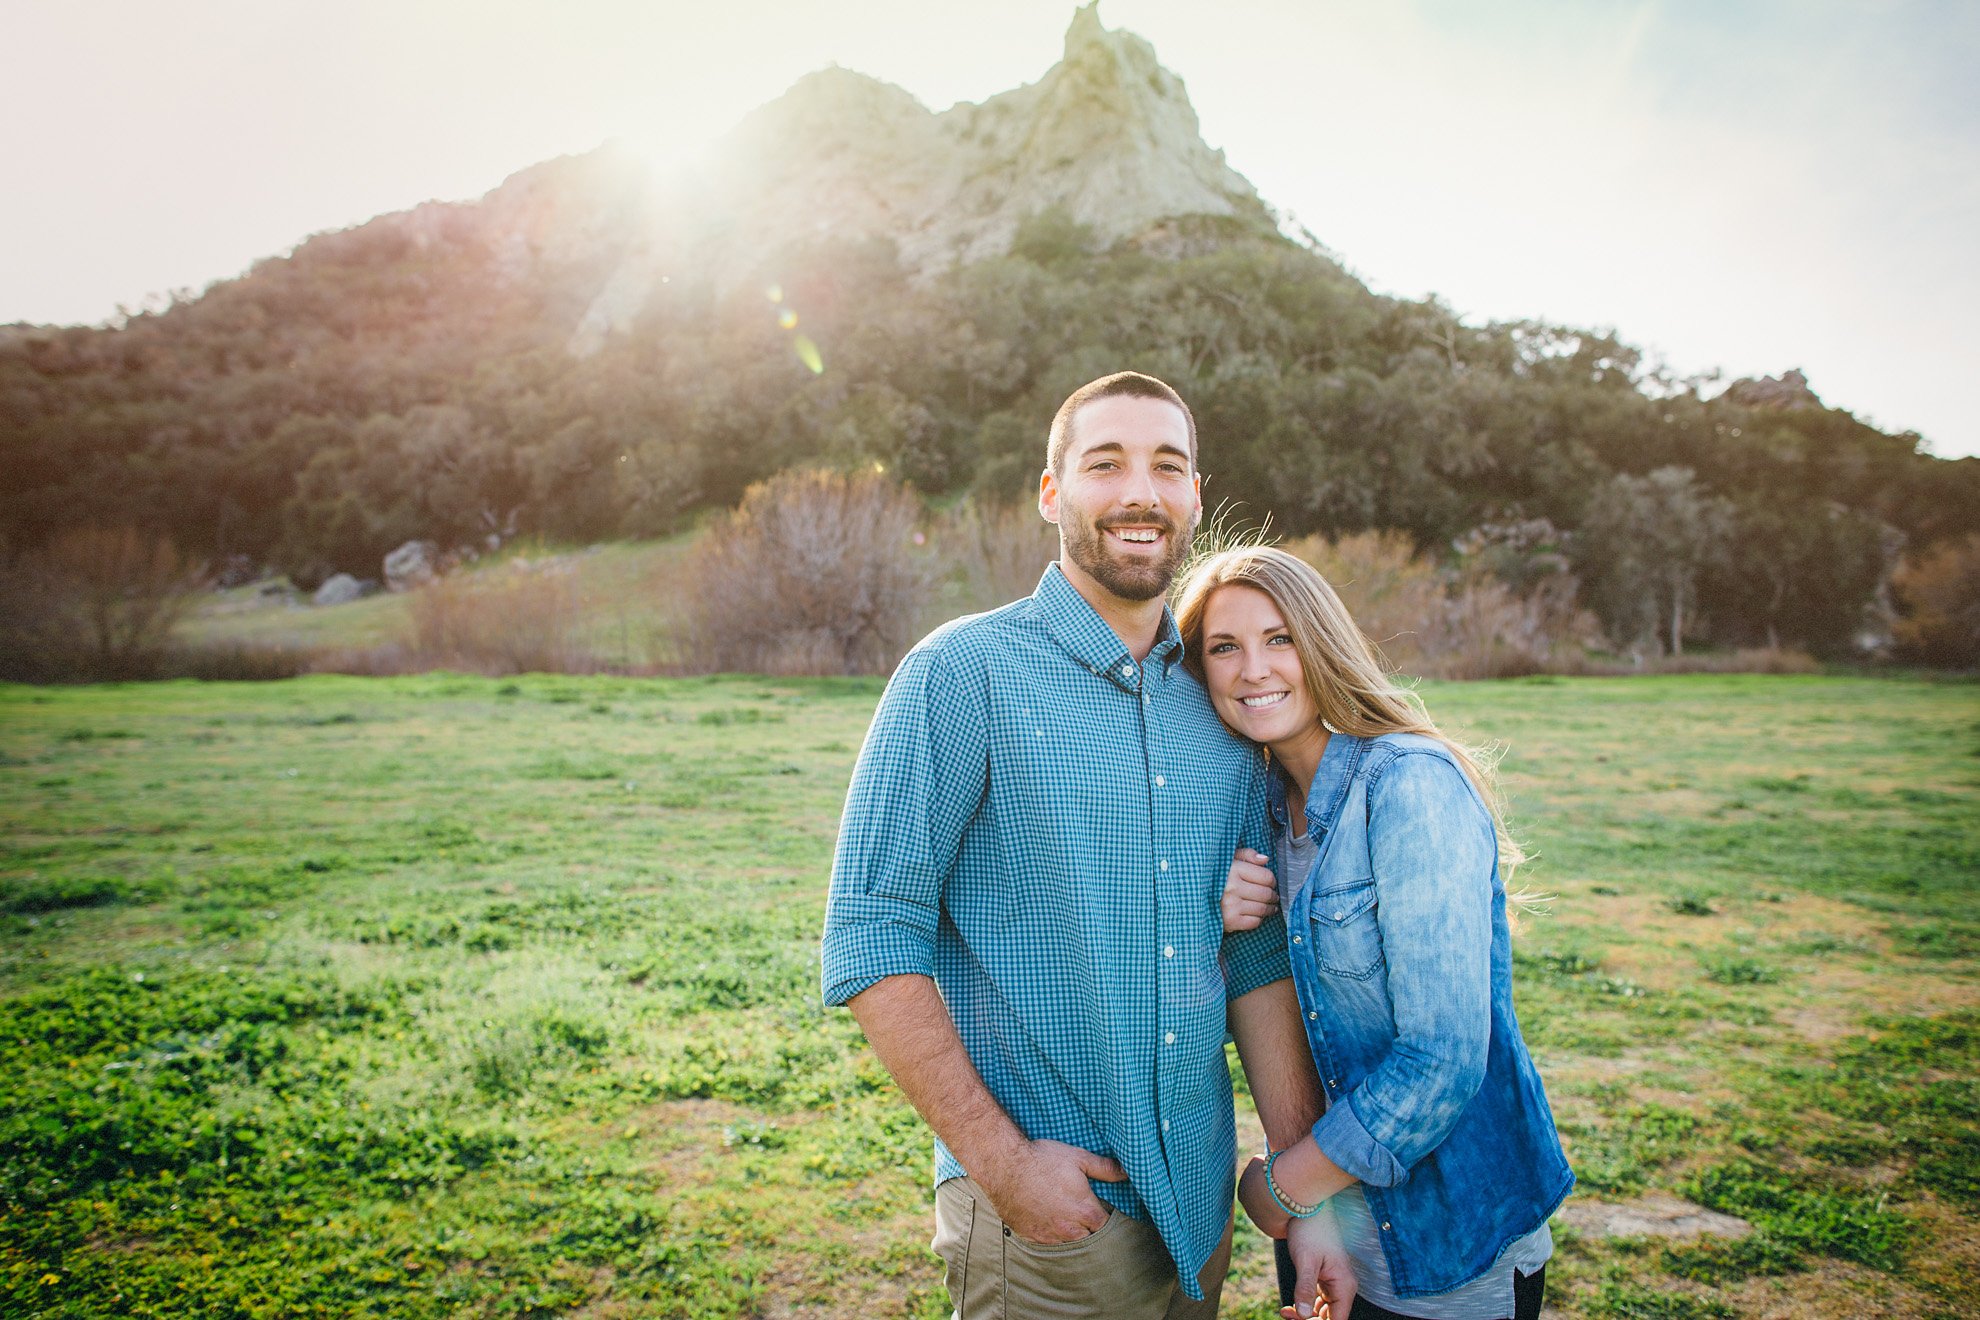 Michael Stephens Photography Engagement shoot at Holland Ranch in San Luis Obispo, California.